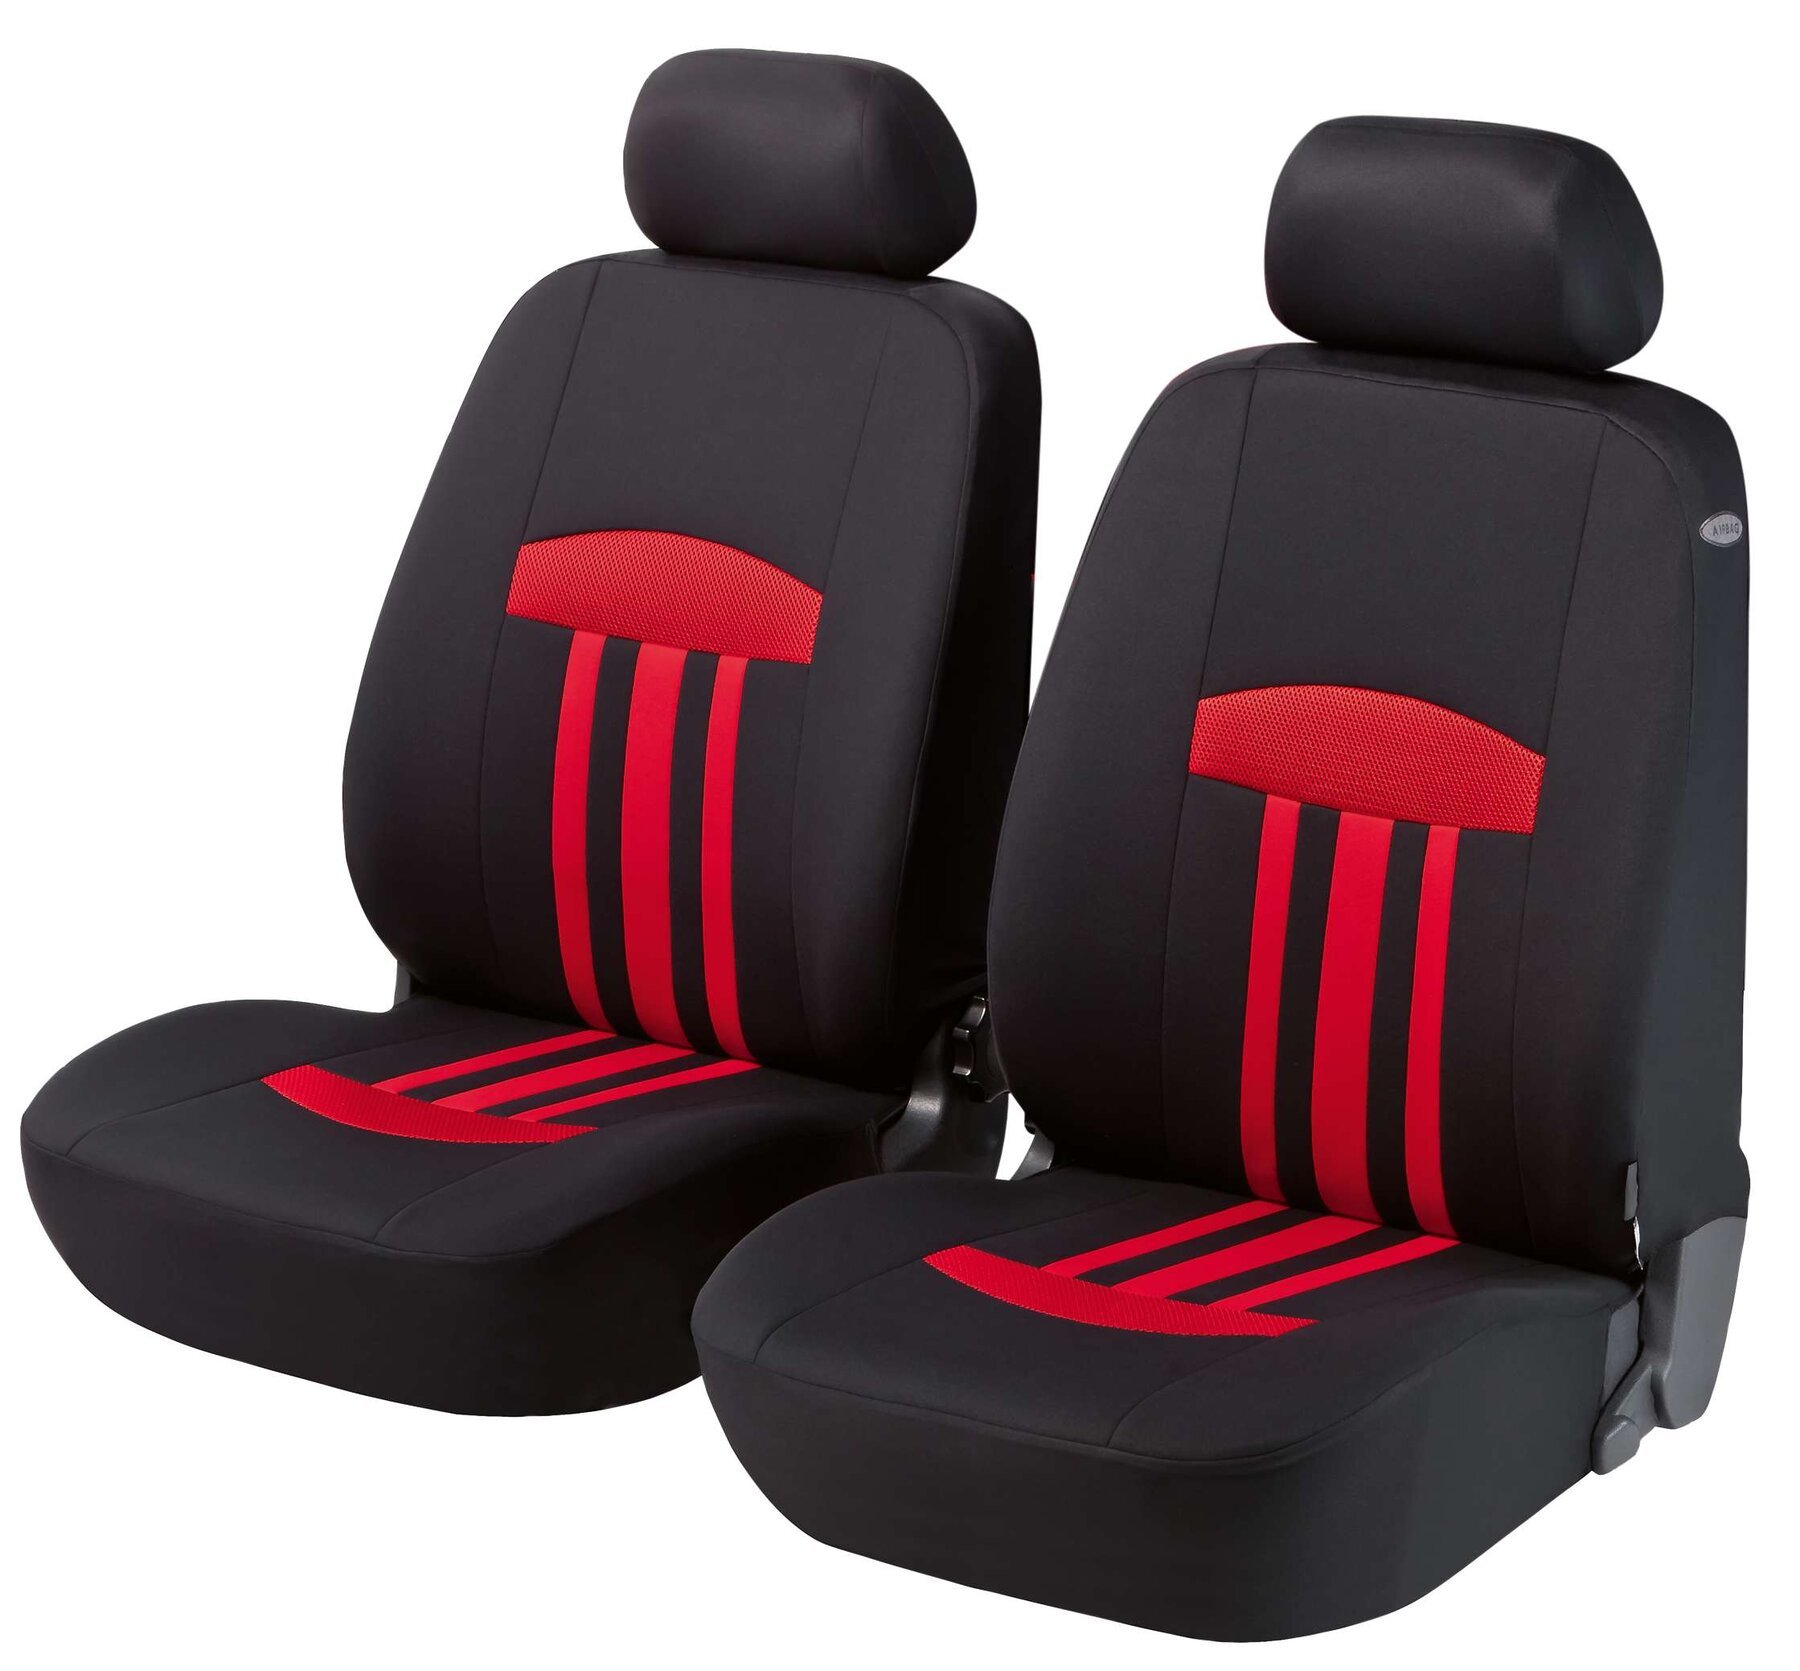 ZIPP-IT Basic Kent red Car Seat covers for two front seats with zipper system